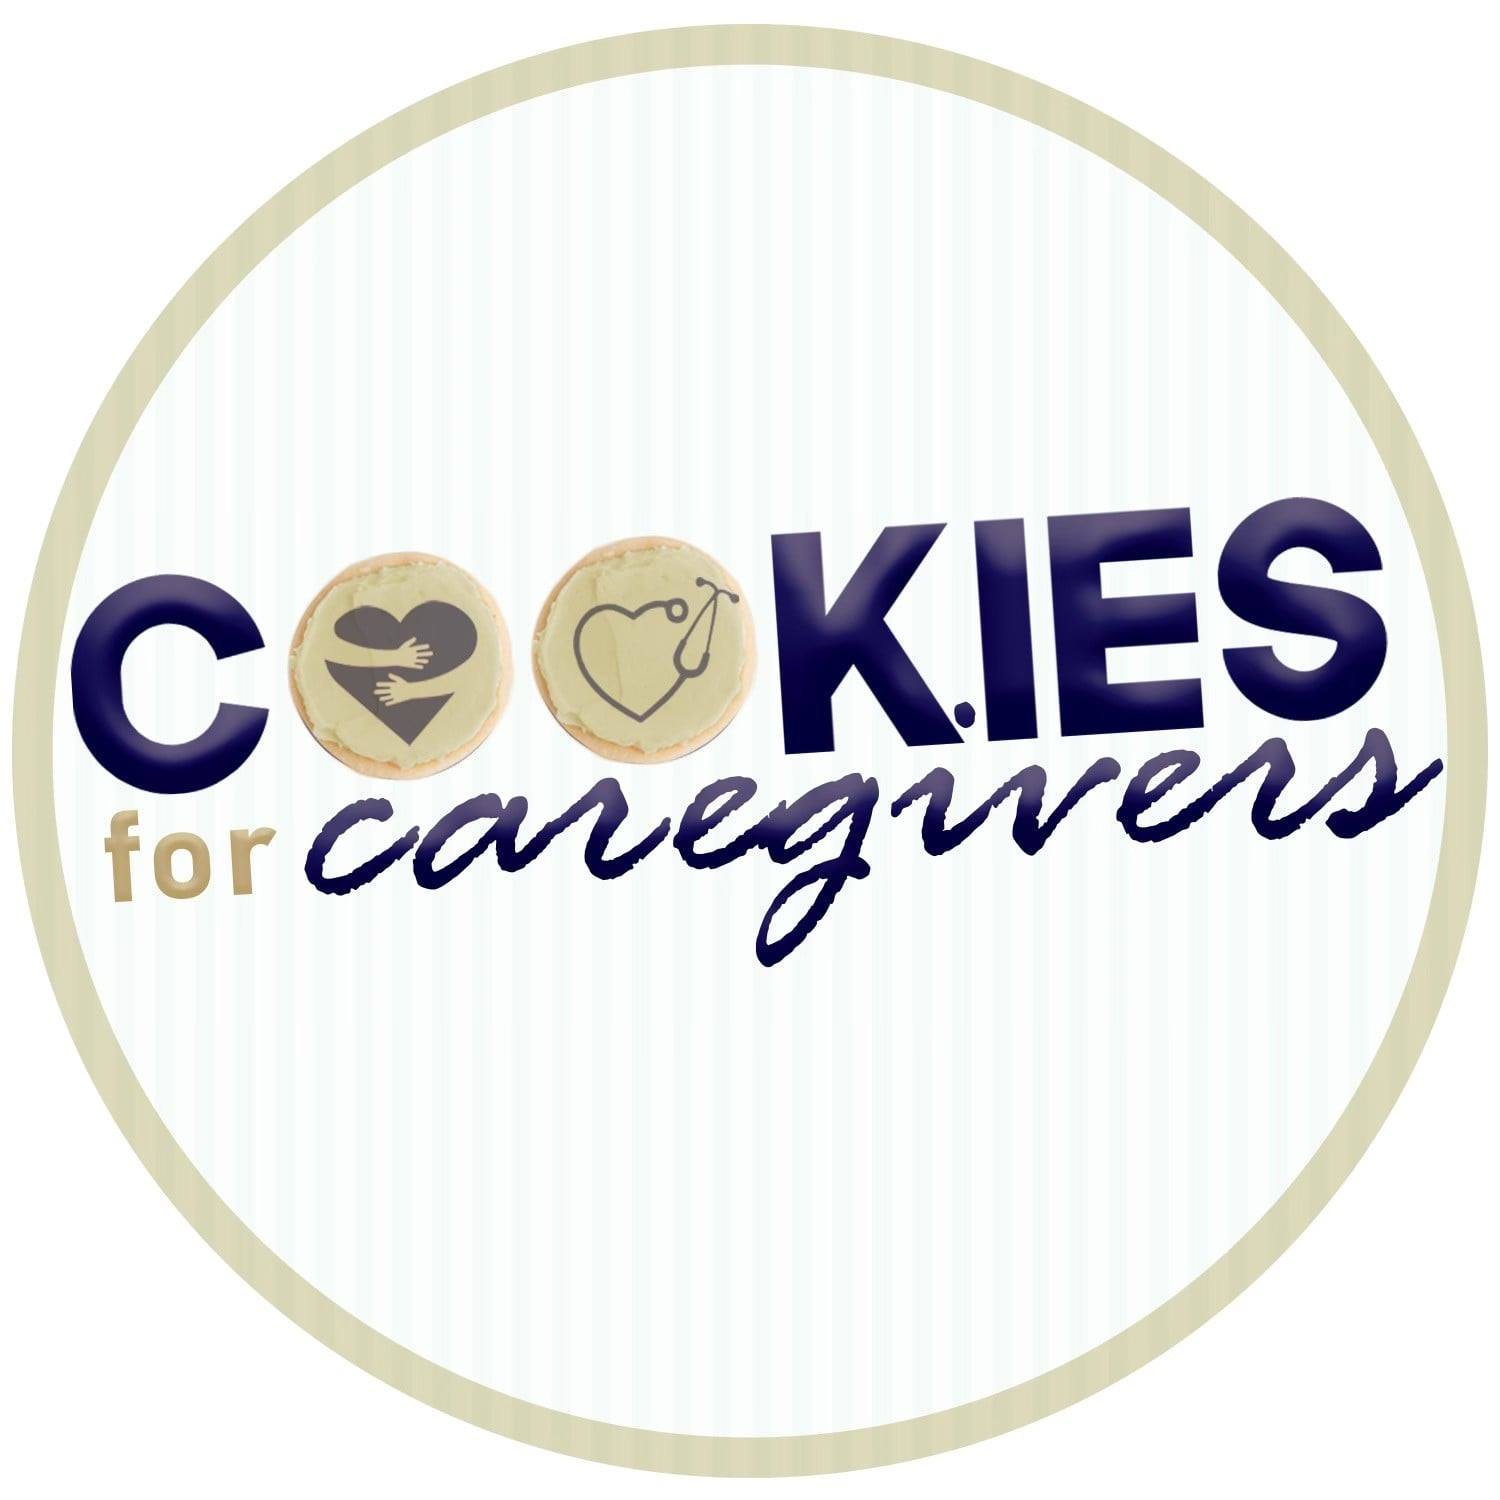 Cookies for Caregivers logo